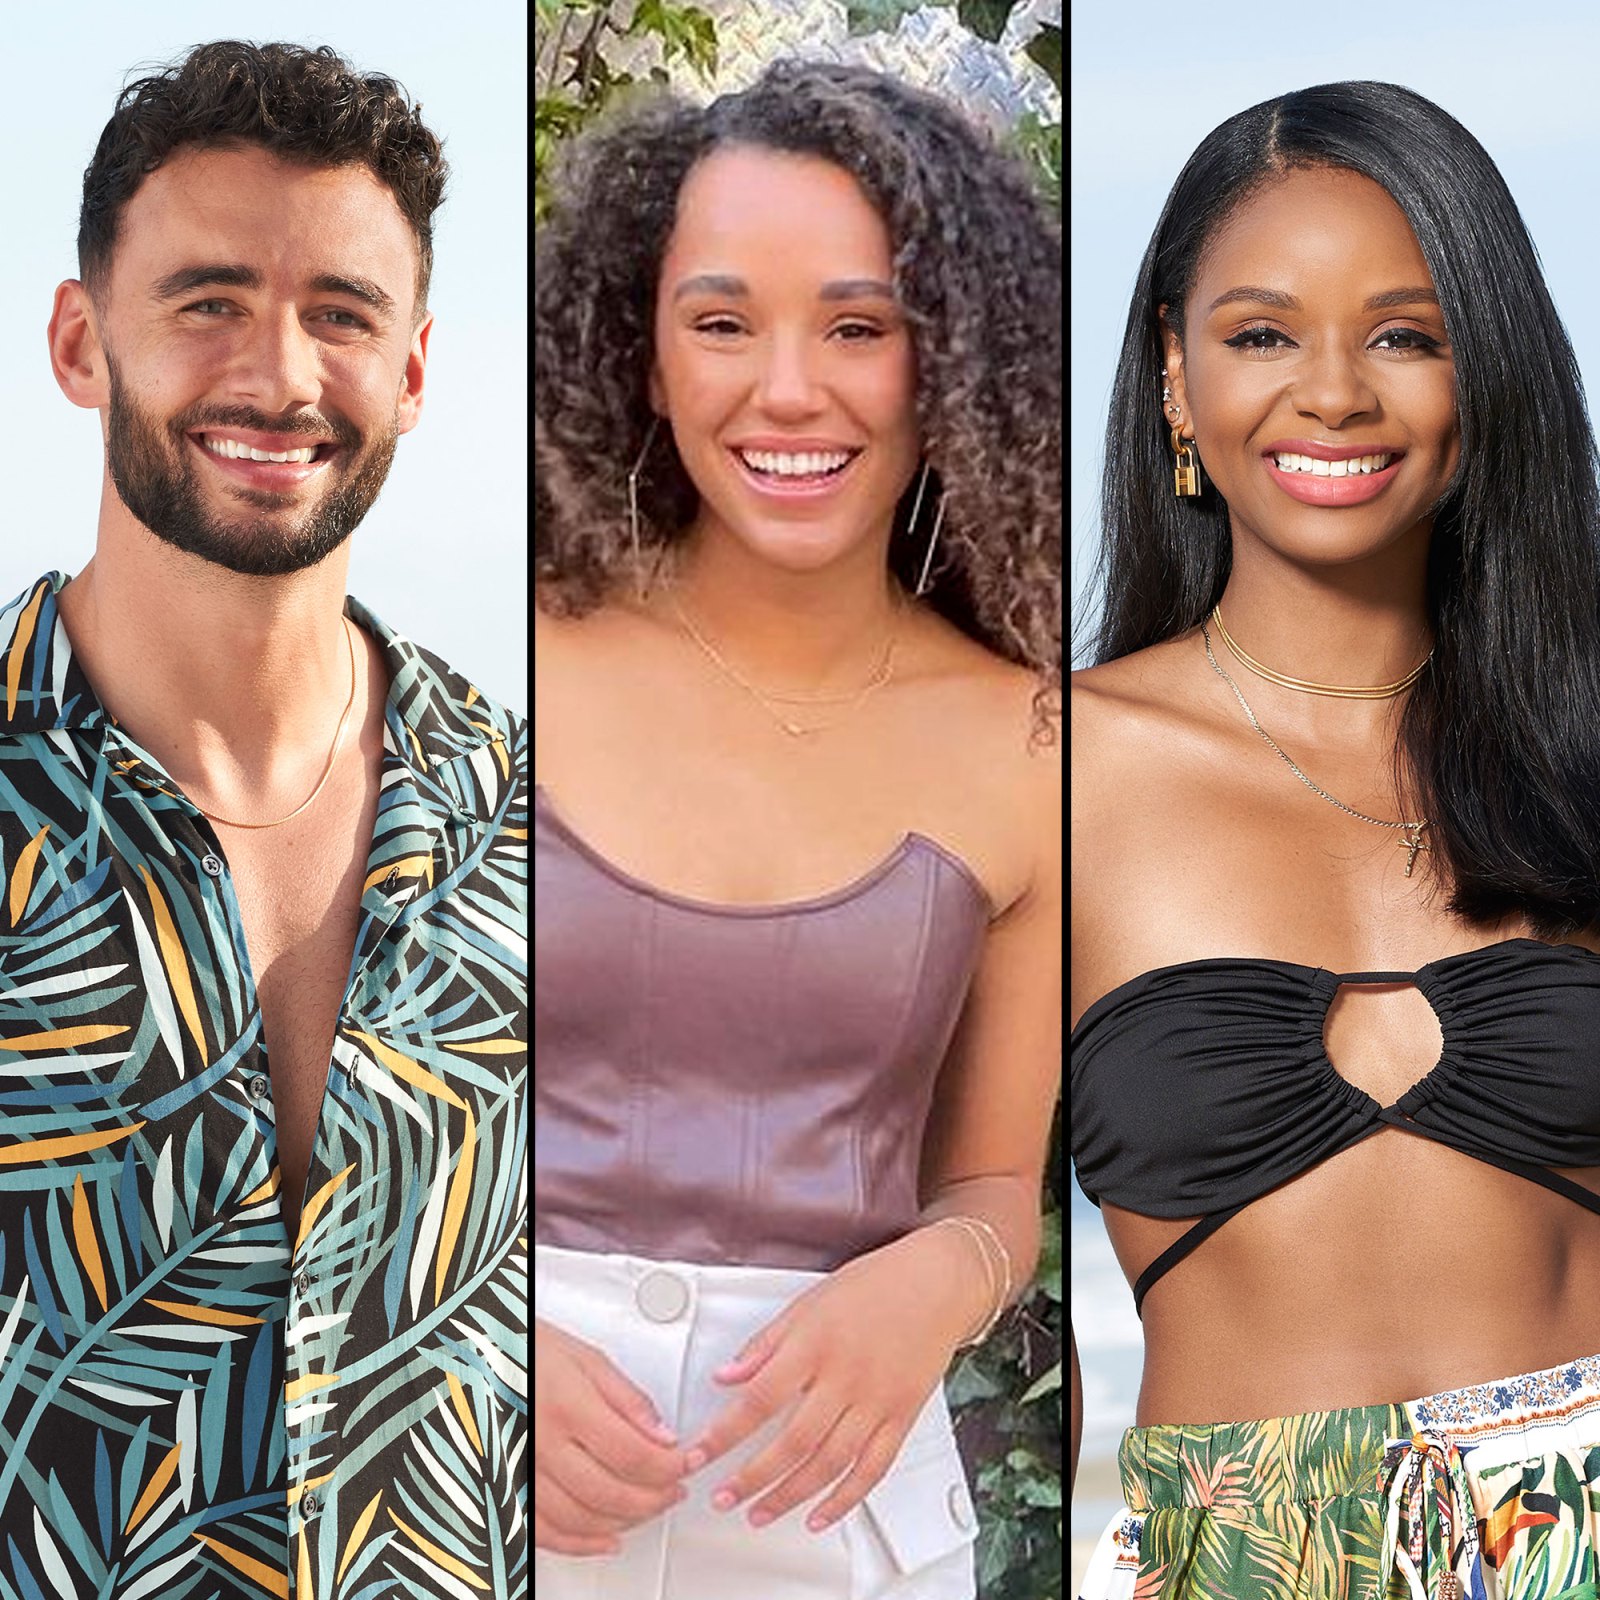 Bachelor in Paradise Brendan Morias and Lose Followers as Bachelor Nation Sides With Natasha Parker